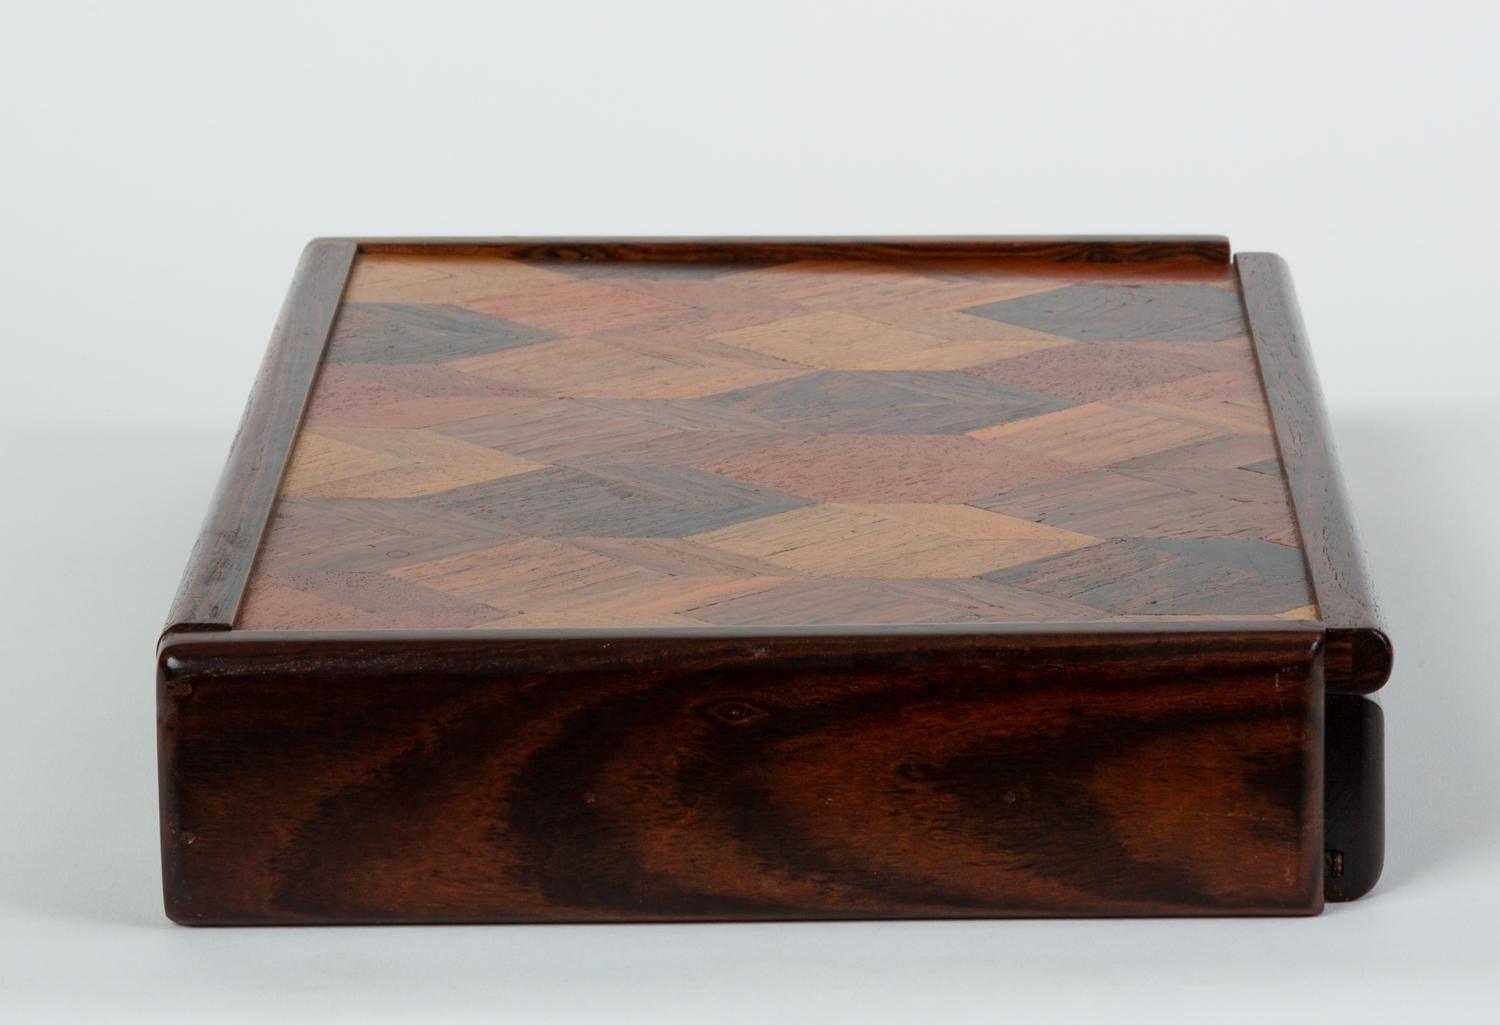 20th Century Don Shoemaker Jewelry or Trinket Box with Trompe L’oeil Inlay